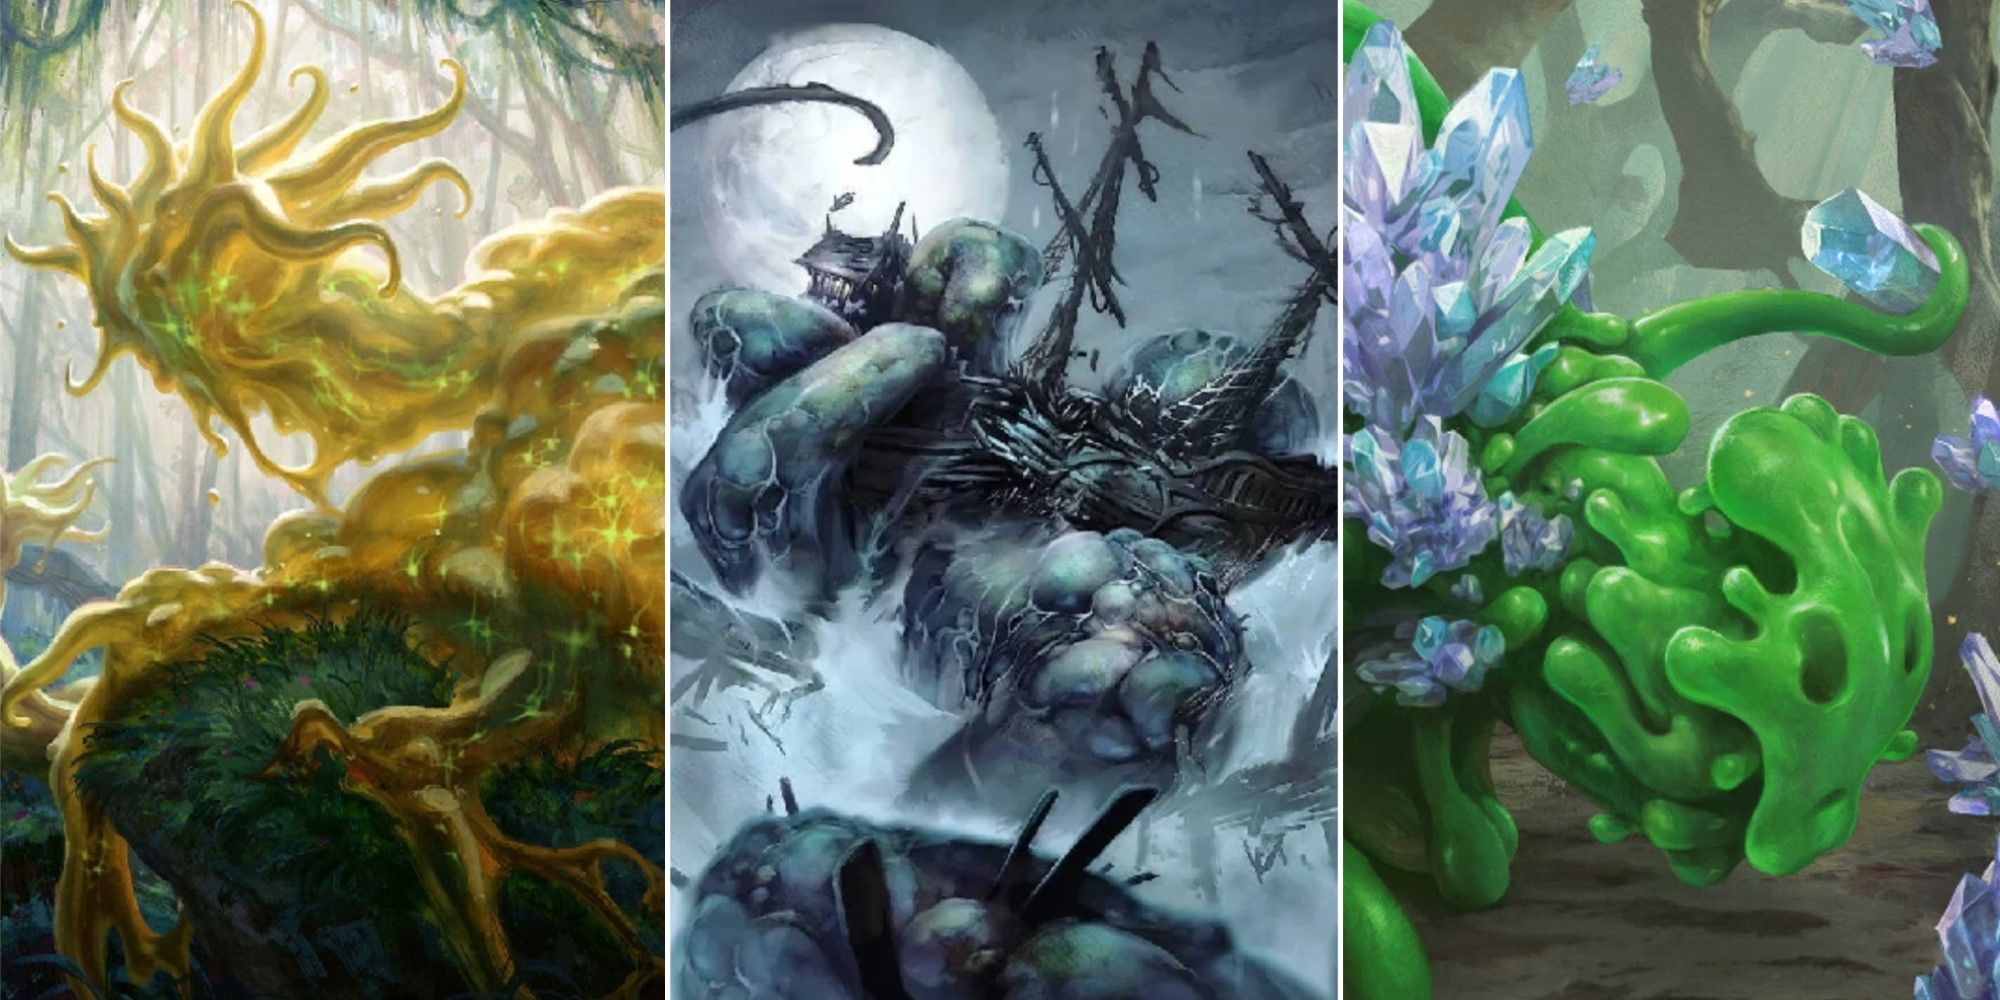 Artwork of three different legendary Ooze creatures from Magic: The Gathering